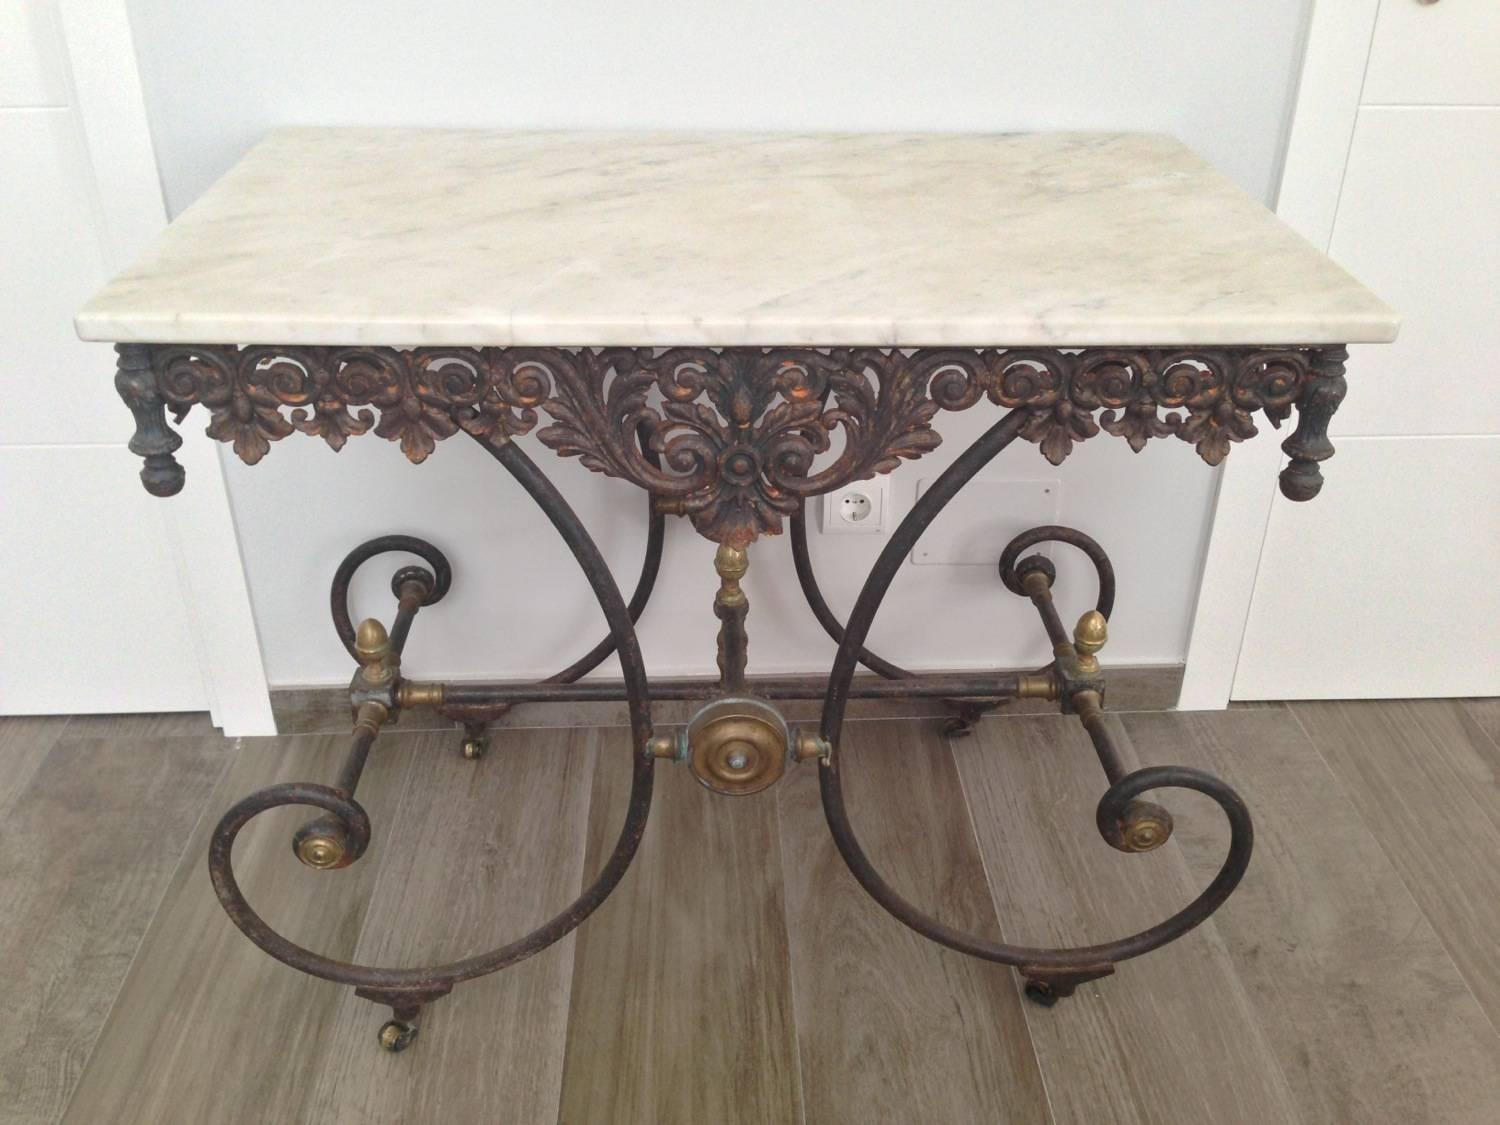 French butchers table from the 19th century, with white marble top, ornate cast frieze and scrolled iron legs. The iron keeps the original patina.

 